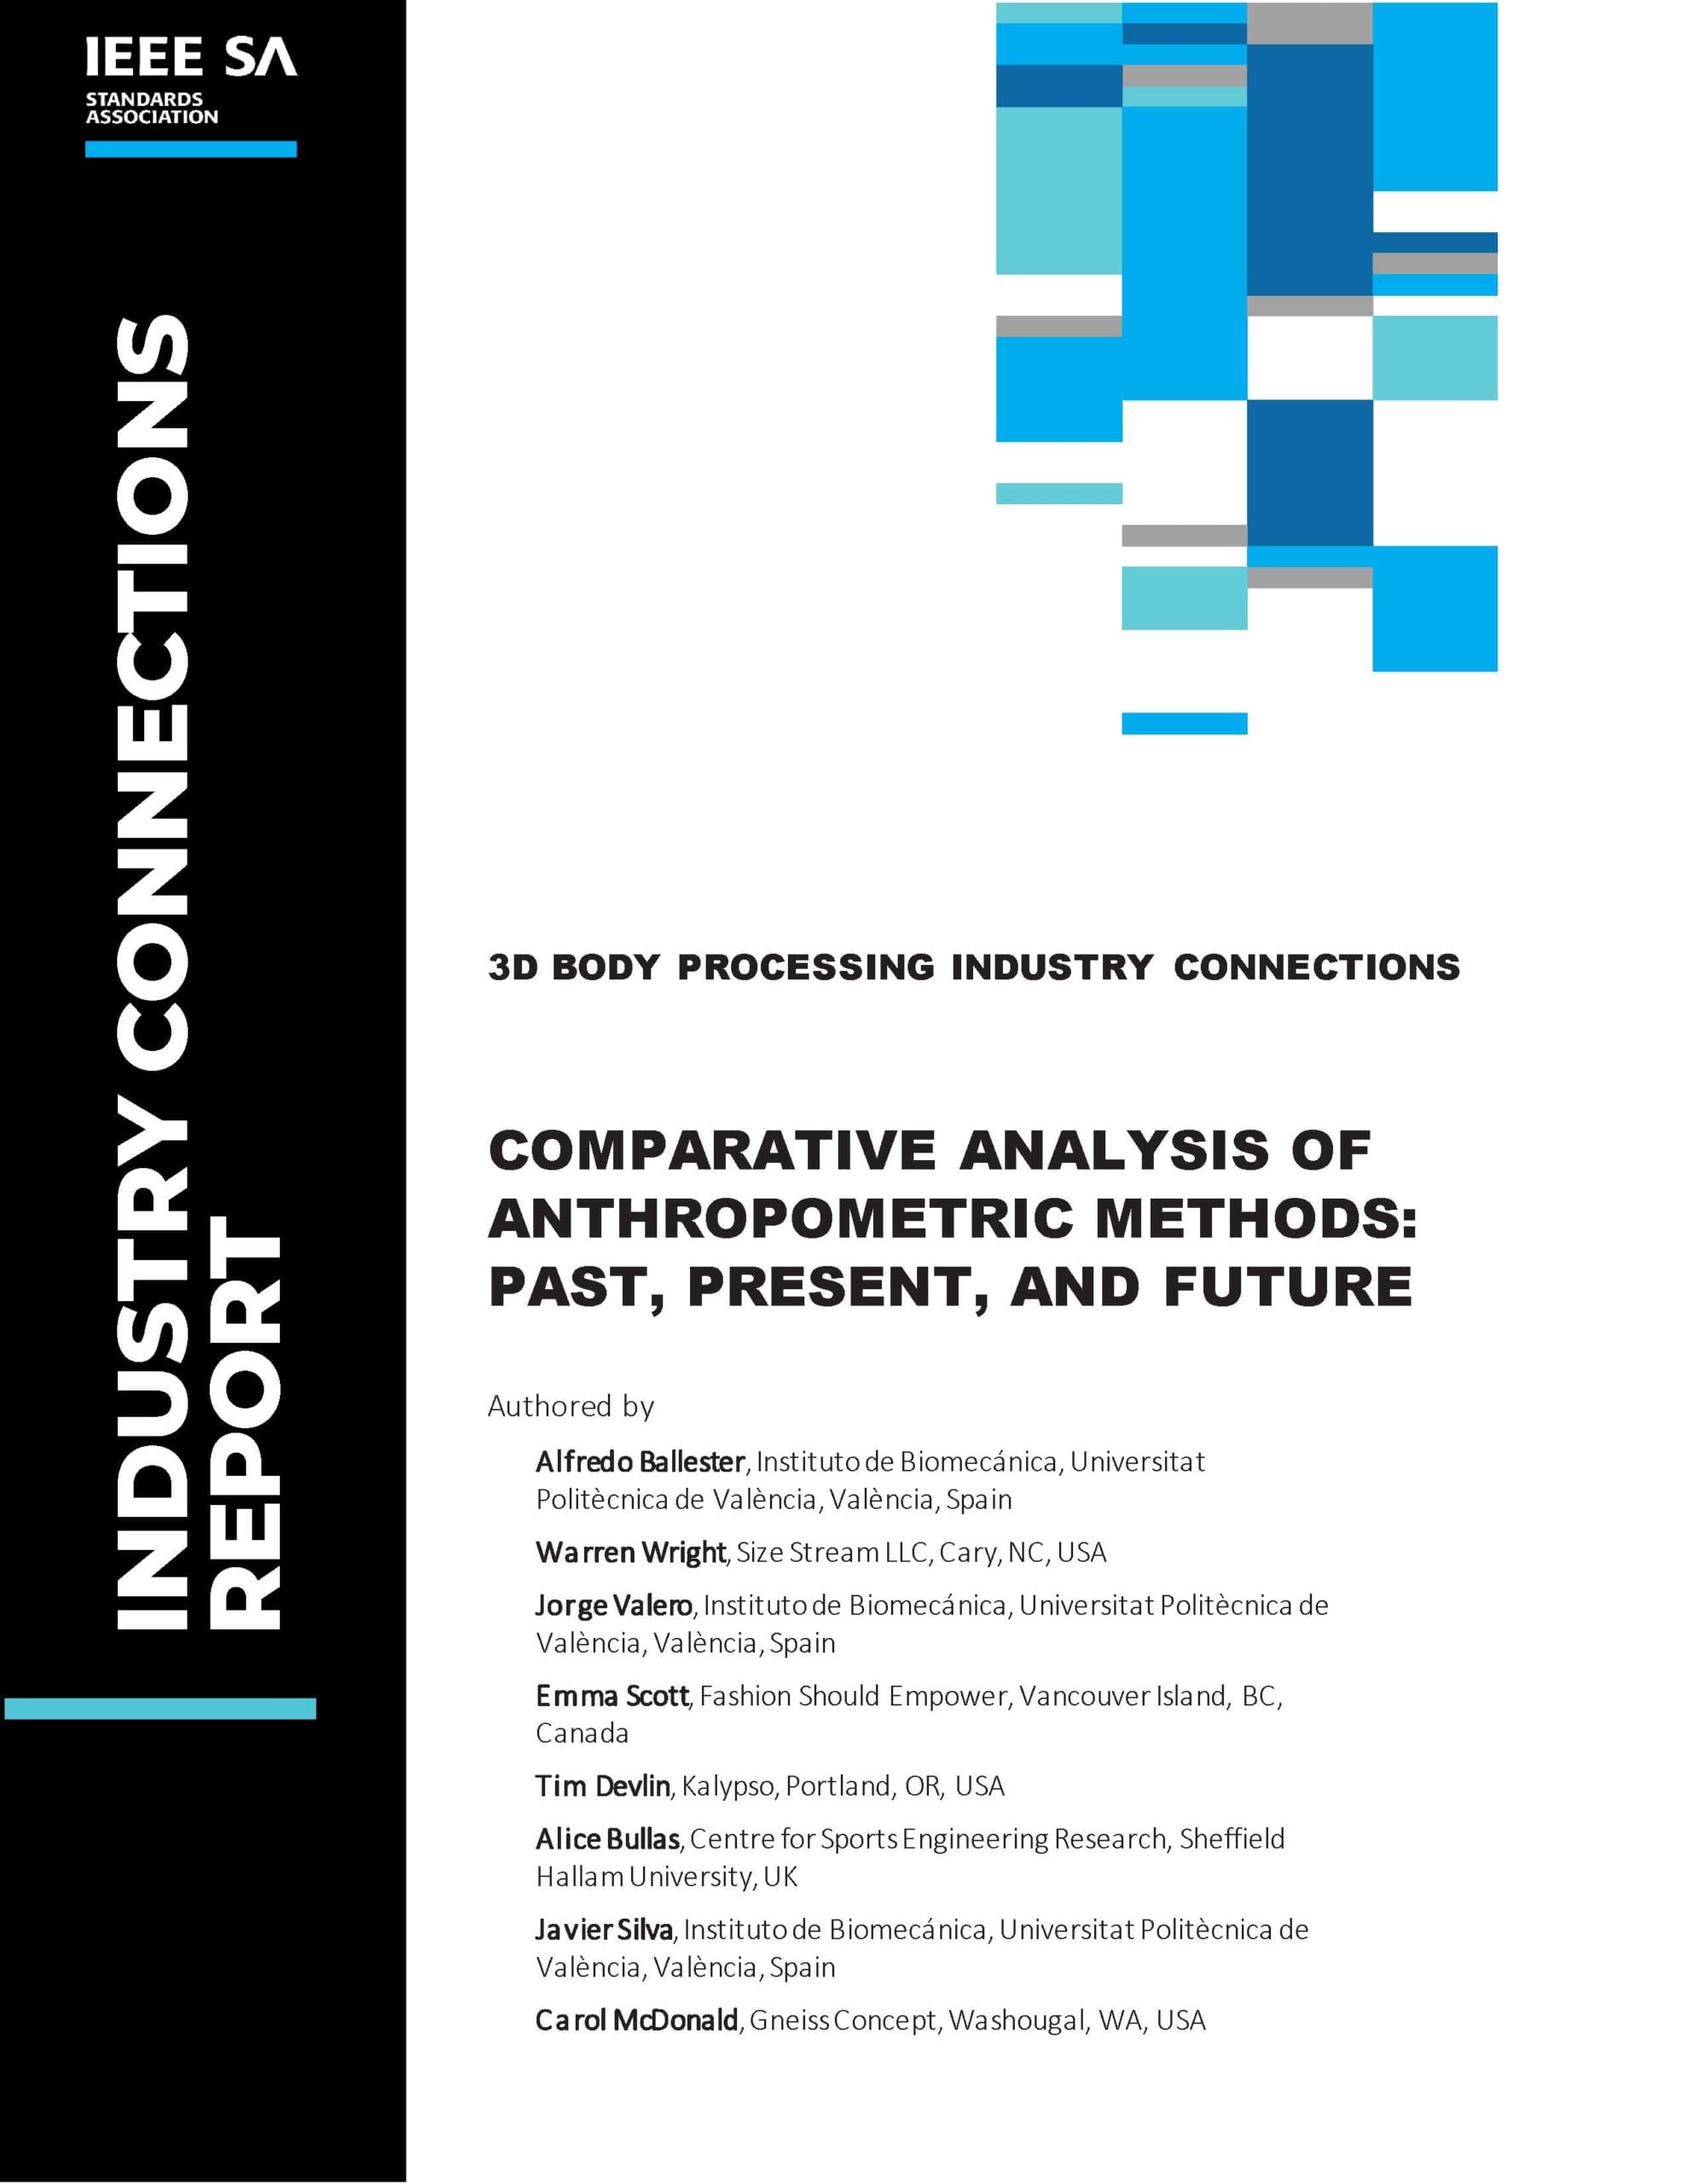 Cover of Industry Connections Report: 3D Body Processing - Comparative Analysis of Anthropometric Methods: Past, Present, and Future.